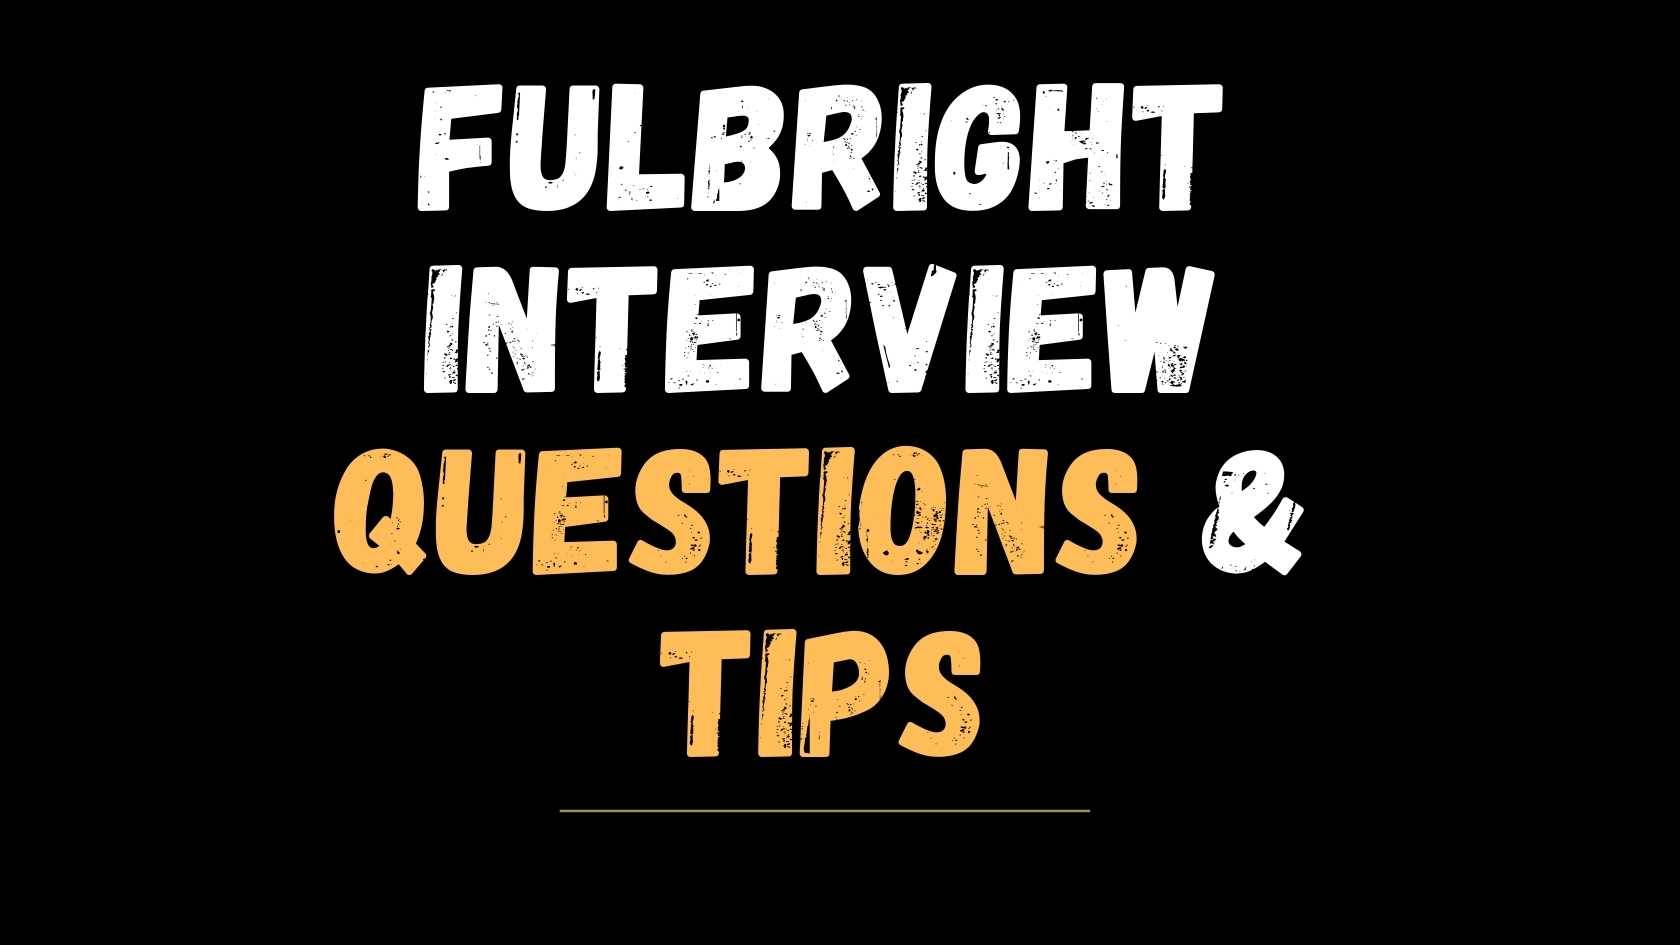 Fulbright Interview Questions & Tips